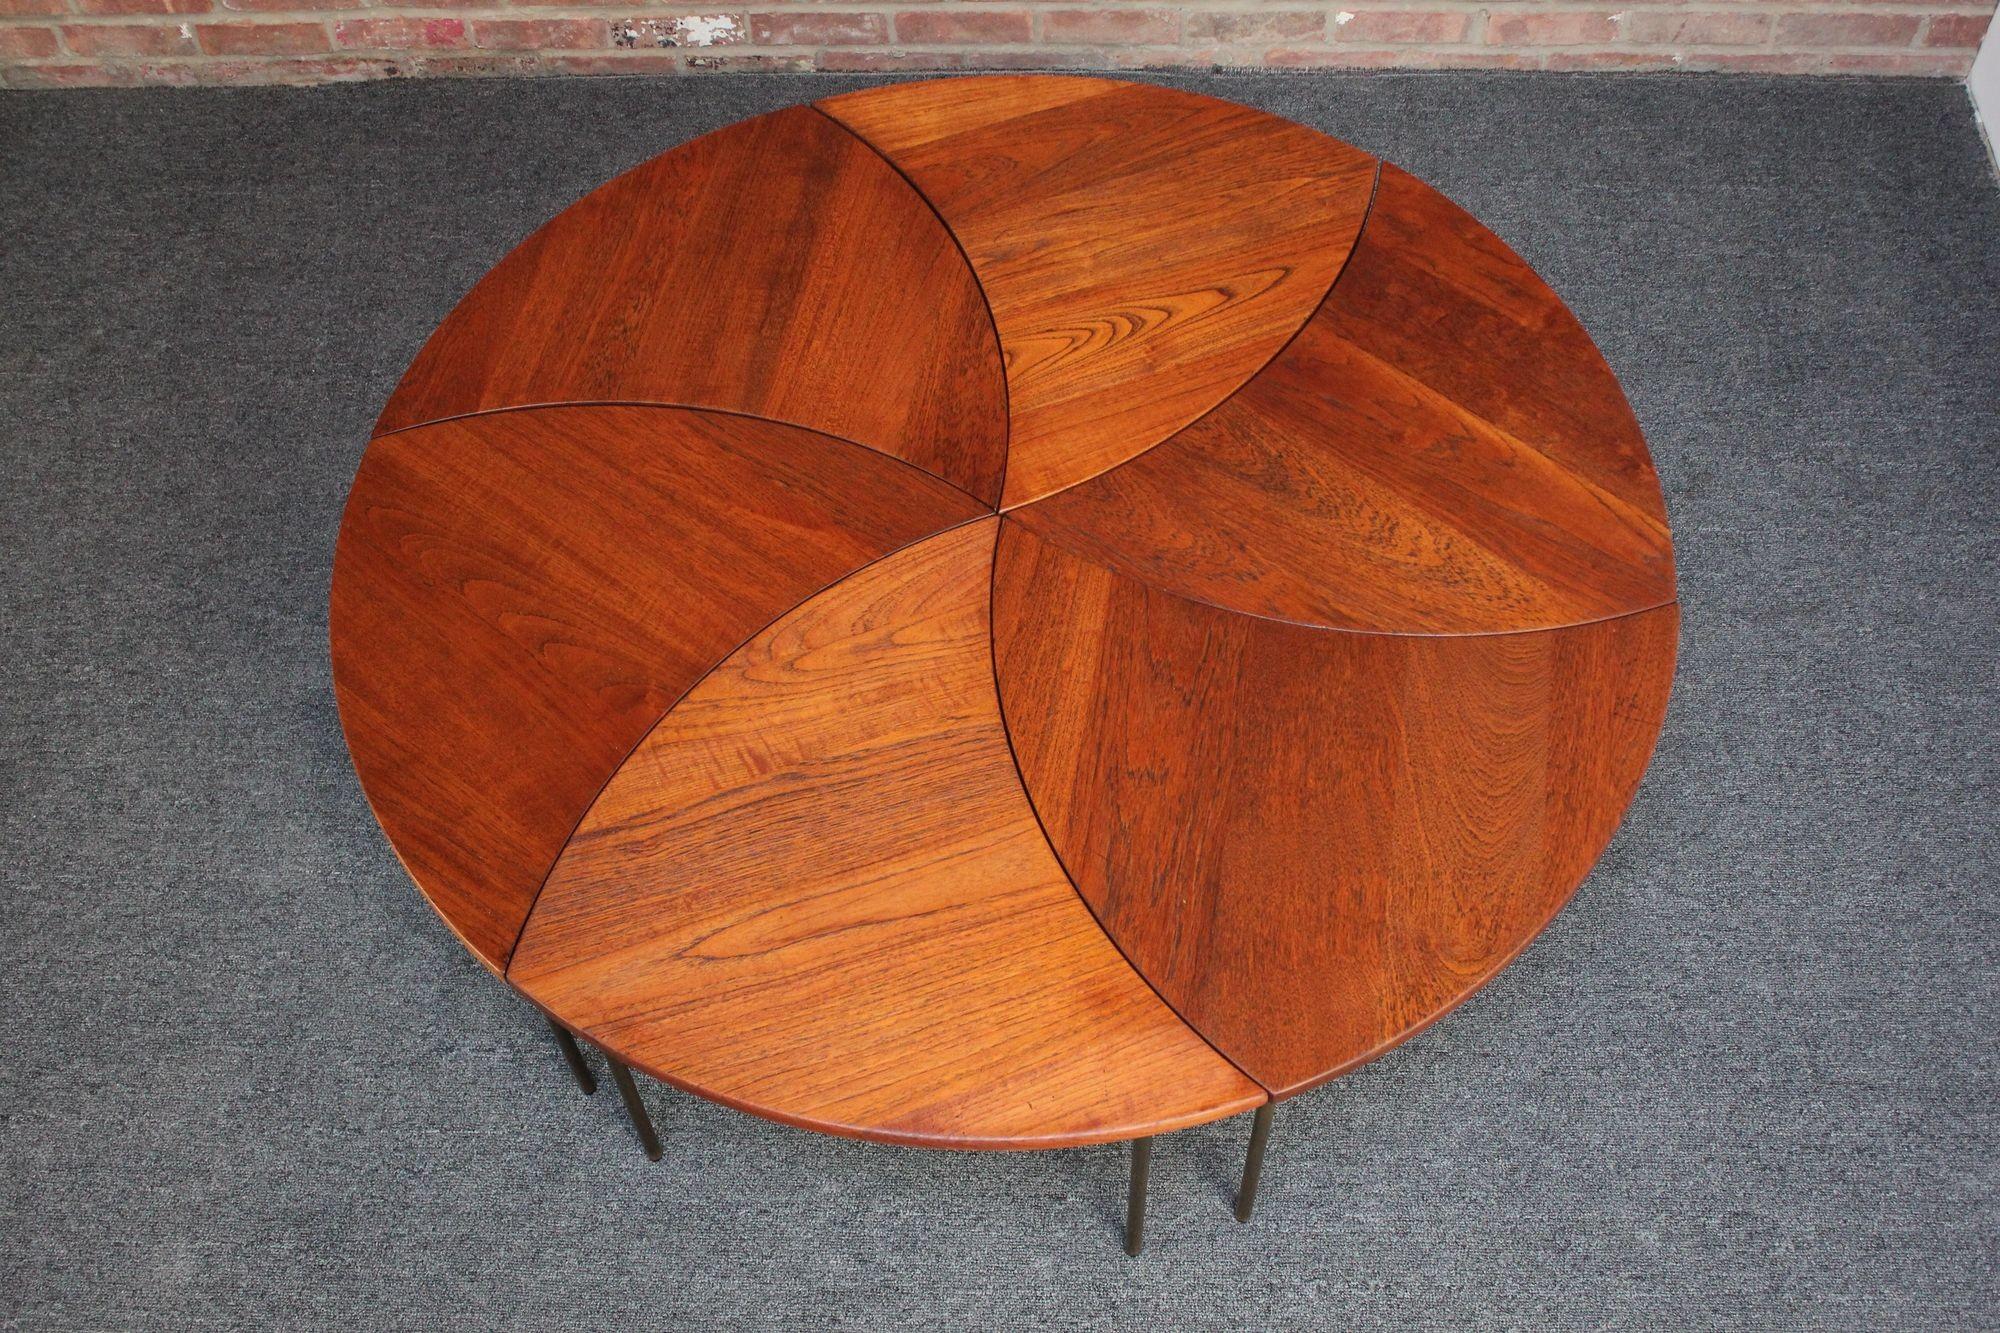 Set of six 'crescent-form' Model 523 side tables designed by Peter Hvidt and Orla Mølgaard-Nielsen for France and Daverkosen (ca. 1953, Denmark - early edition pre-France & Son which produced these tables almost a decade later in 1962). 
Segments